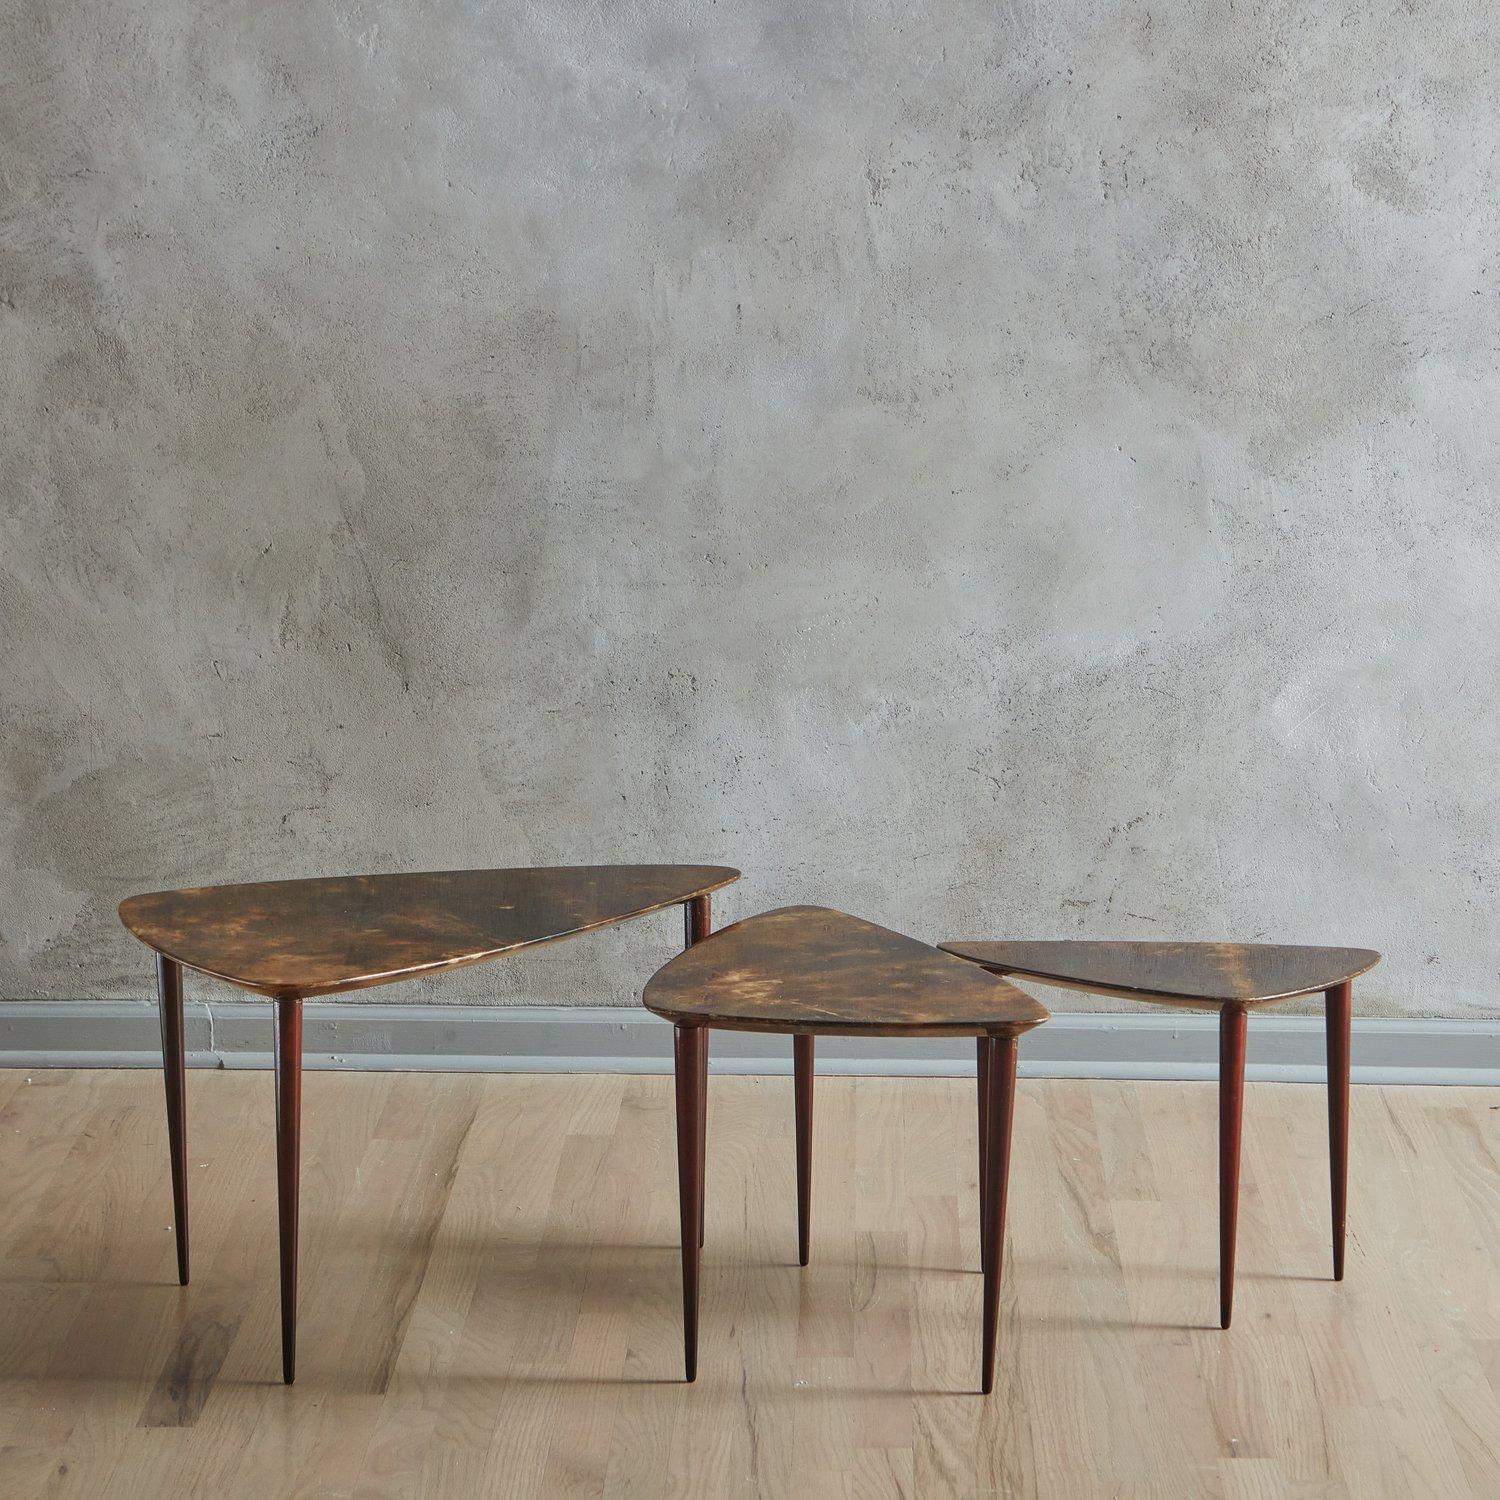 A trio of 1950s Italian side or coffee tables in the style of Aldo Tura. These tables feature triangular tabletops with rounded edges and have a lacquered parchment finish in a deep brown hue with subtle color variations. They stand on tapered